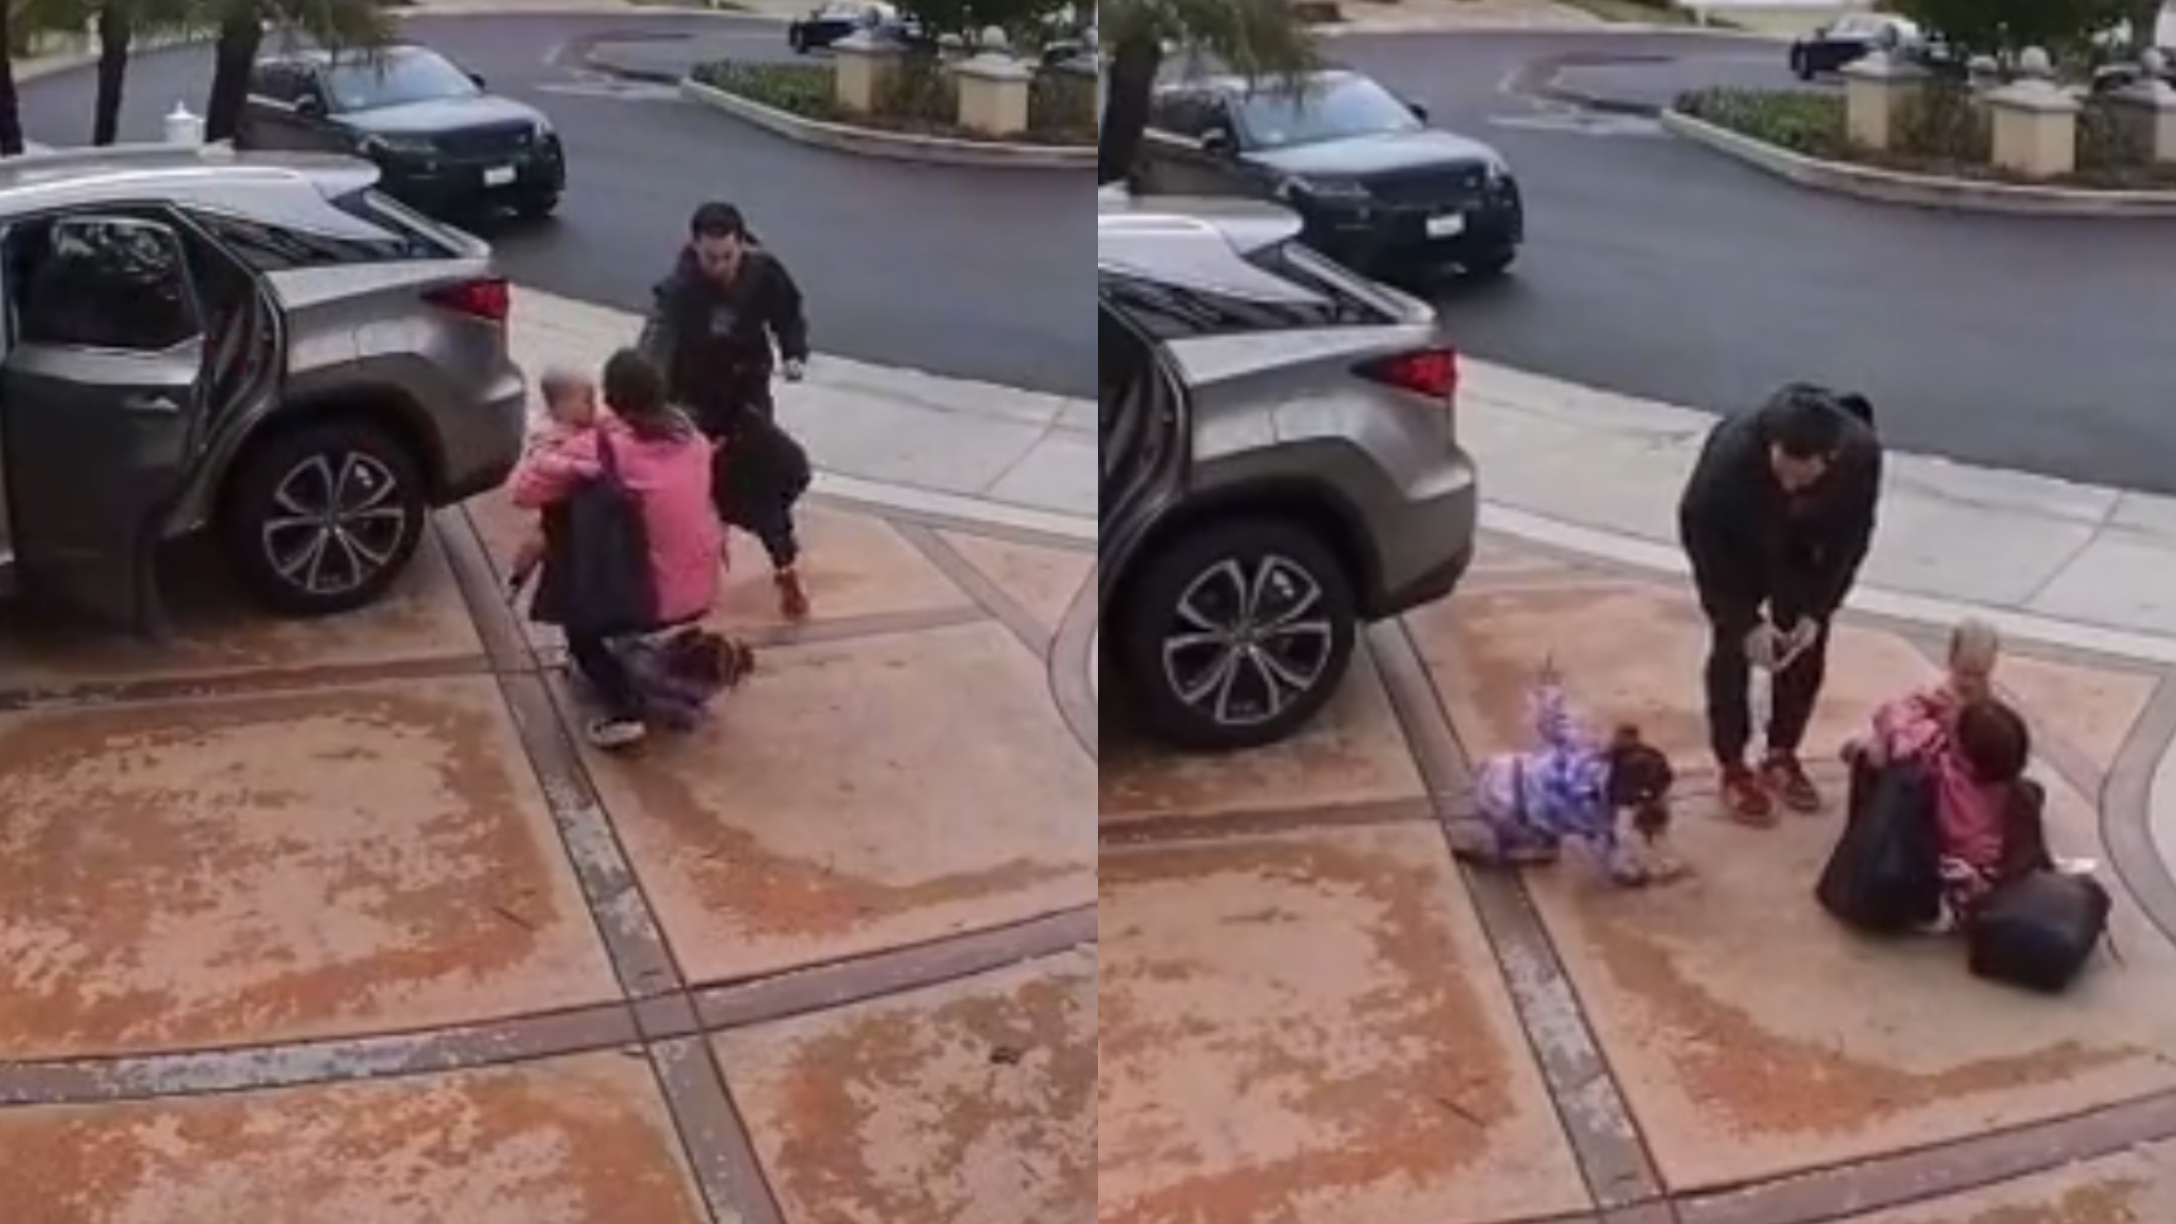 Video of Mom Falling While Getting Kids Out the Car Sparks Single Married Mom Debate pic